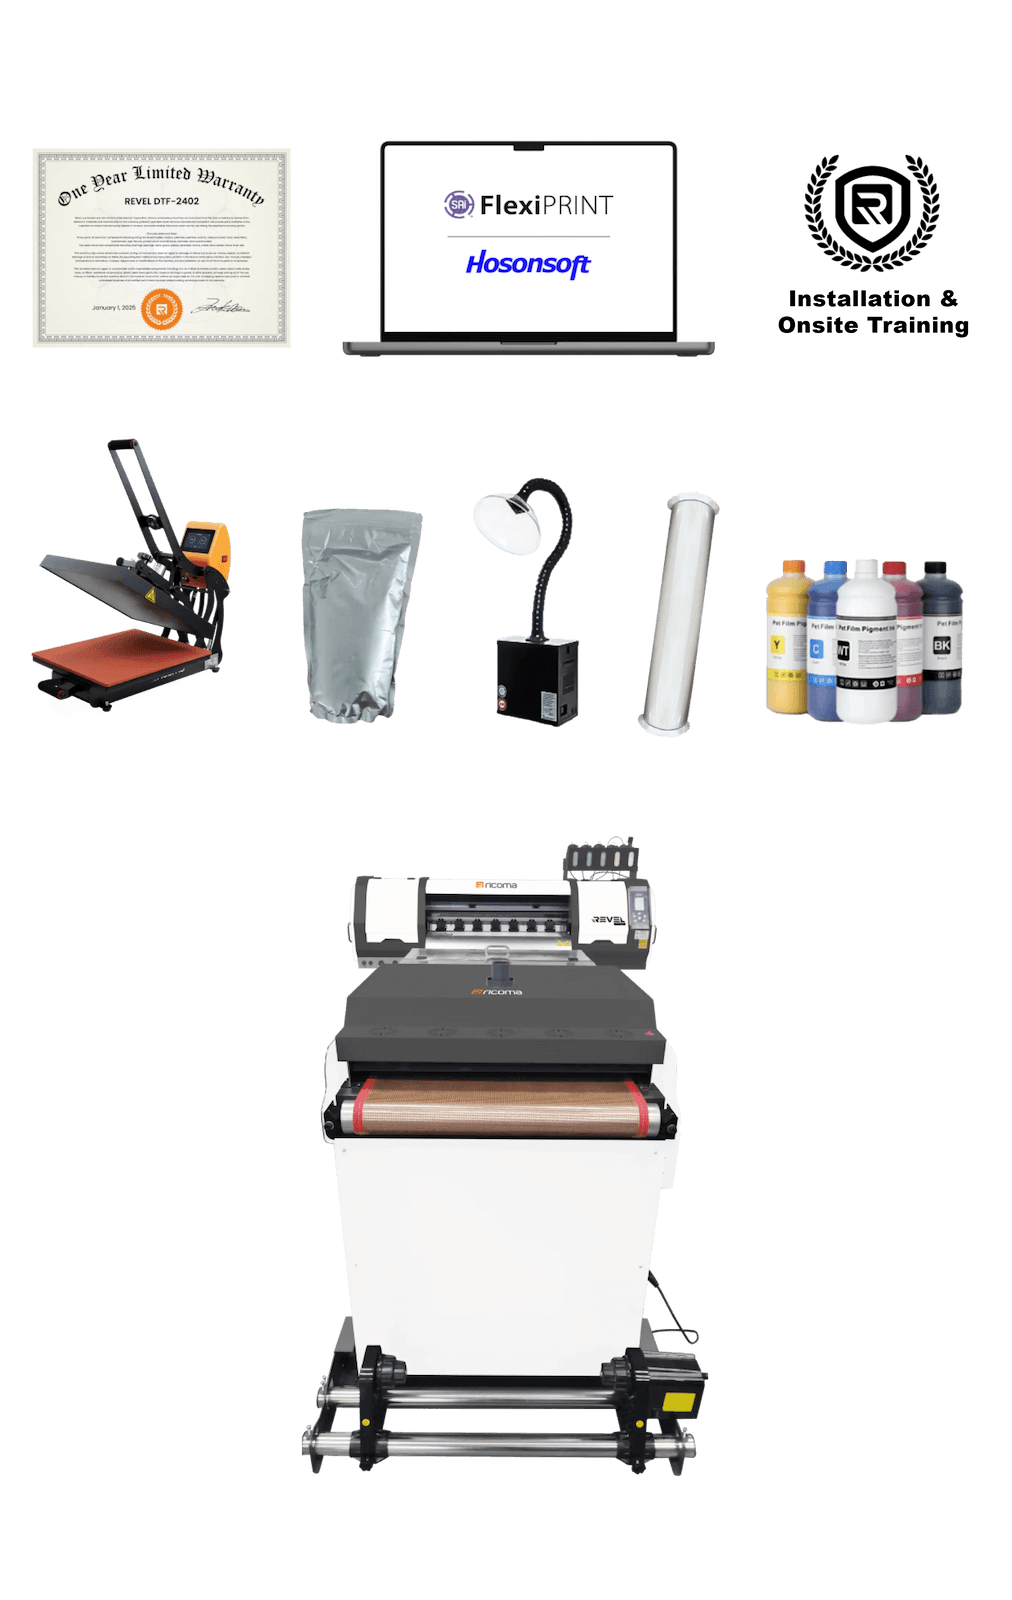 Flexi Print PM RIP software,Hosonsoft editing and print management software,60cm Hot Peel Film 100m roll,DTF Inks ONE 1L each of C,M,Y,K,W,DTF Adhesive Powder 1kg,Purifier,Ricoma 16" x 20" Auto Open Flat Heat Press,Unlimited training & support,12 month warranty,Installation & onsite training ,Access to the private elite Ricoma Facebook group